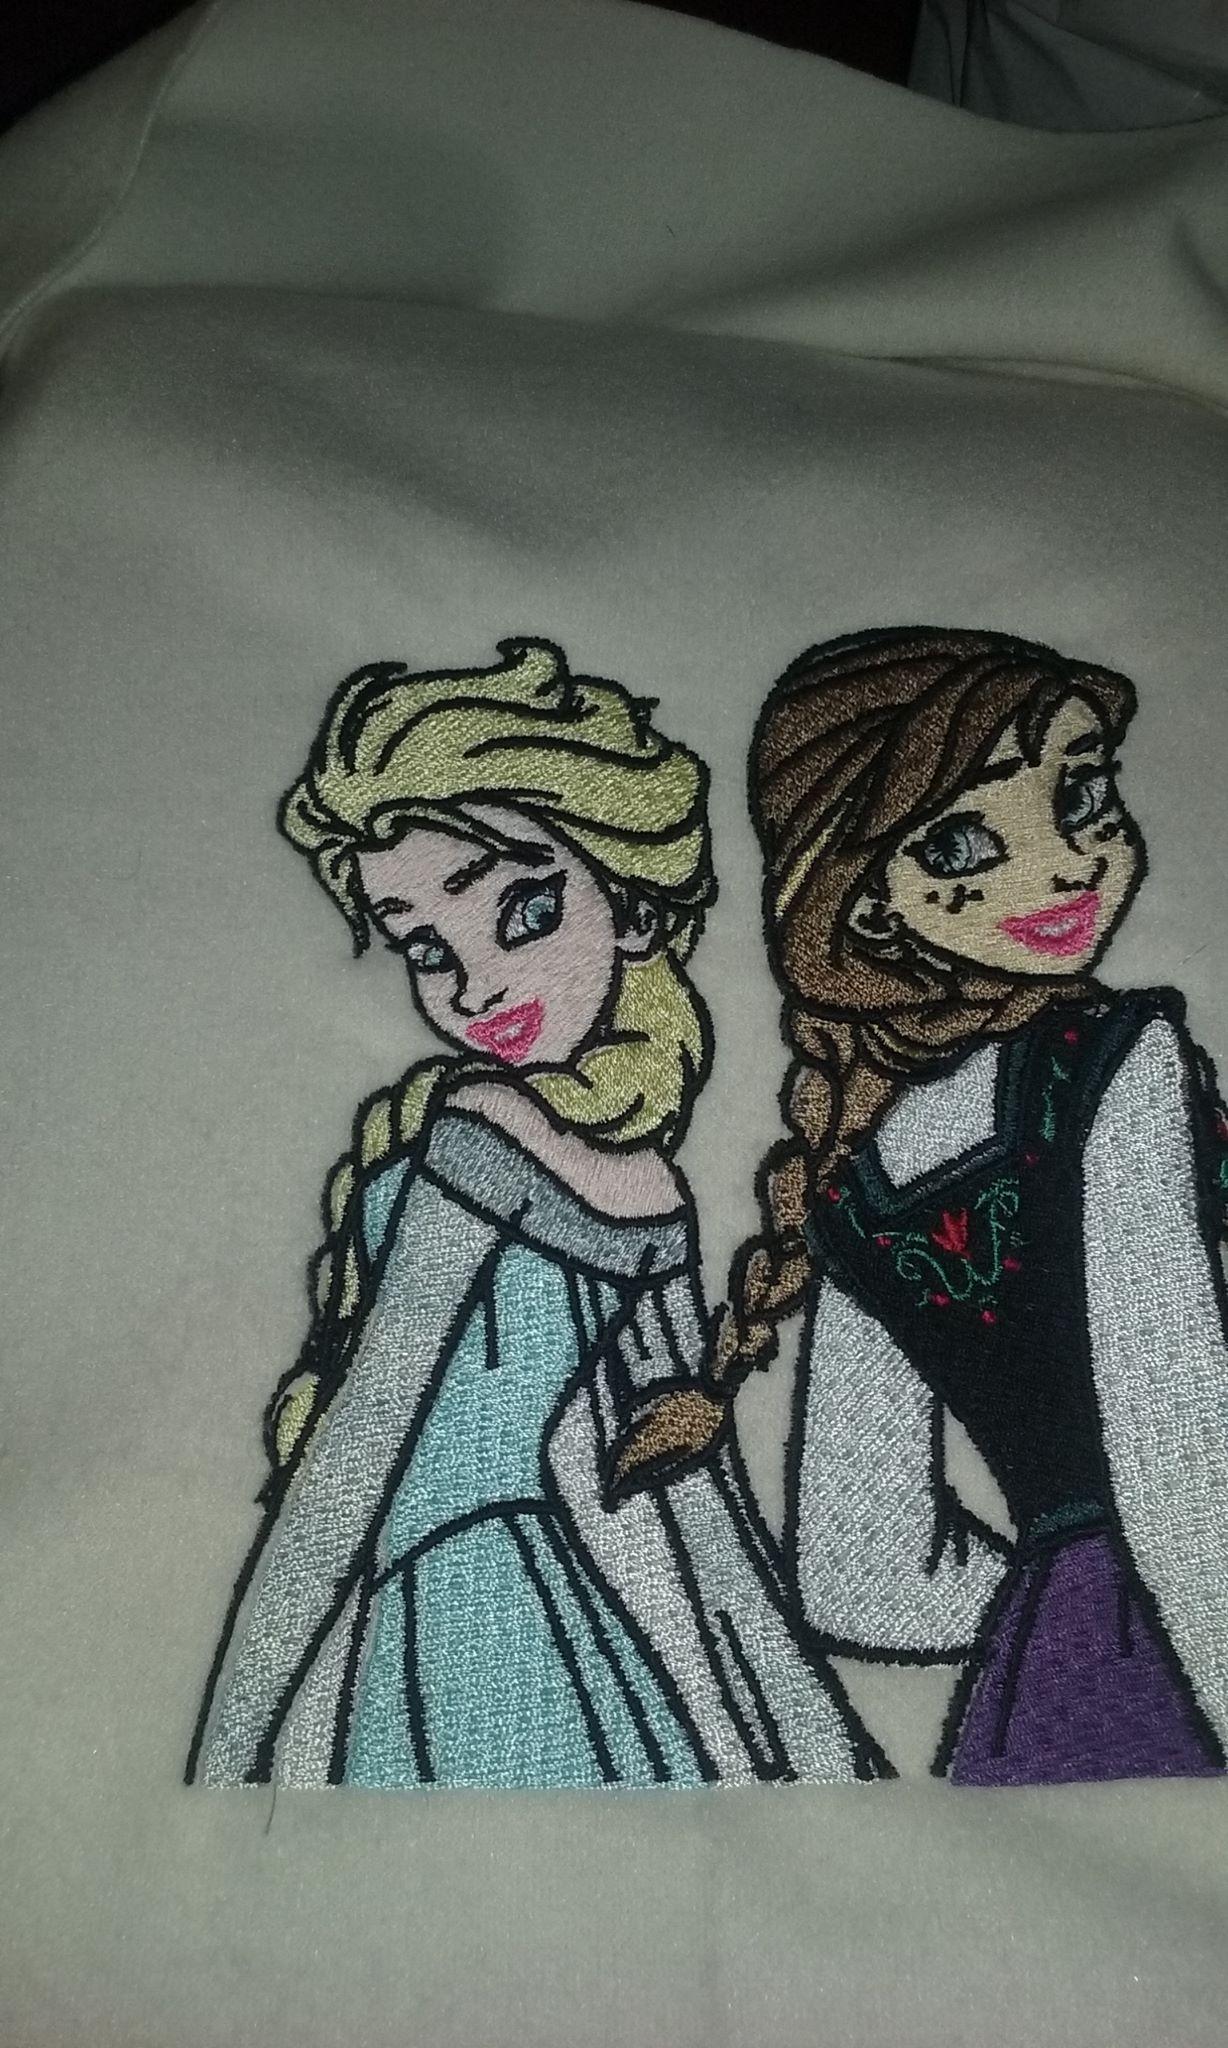 Elsa and Anna embroidered design